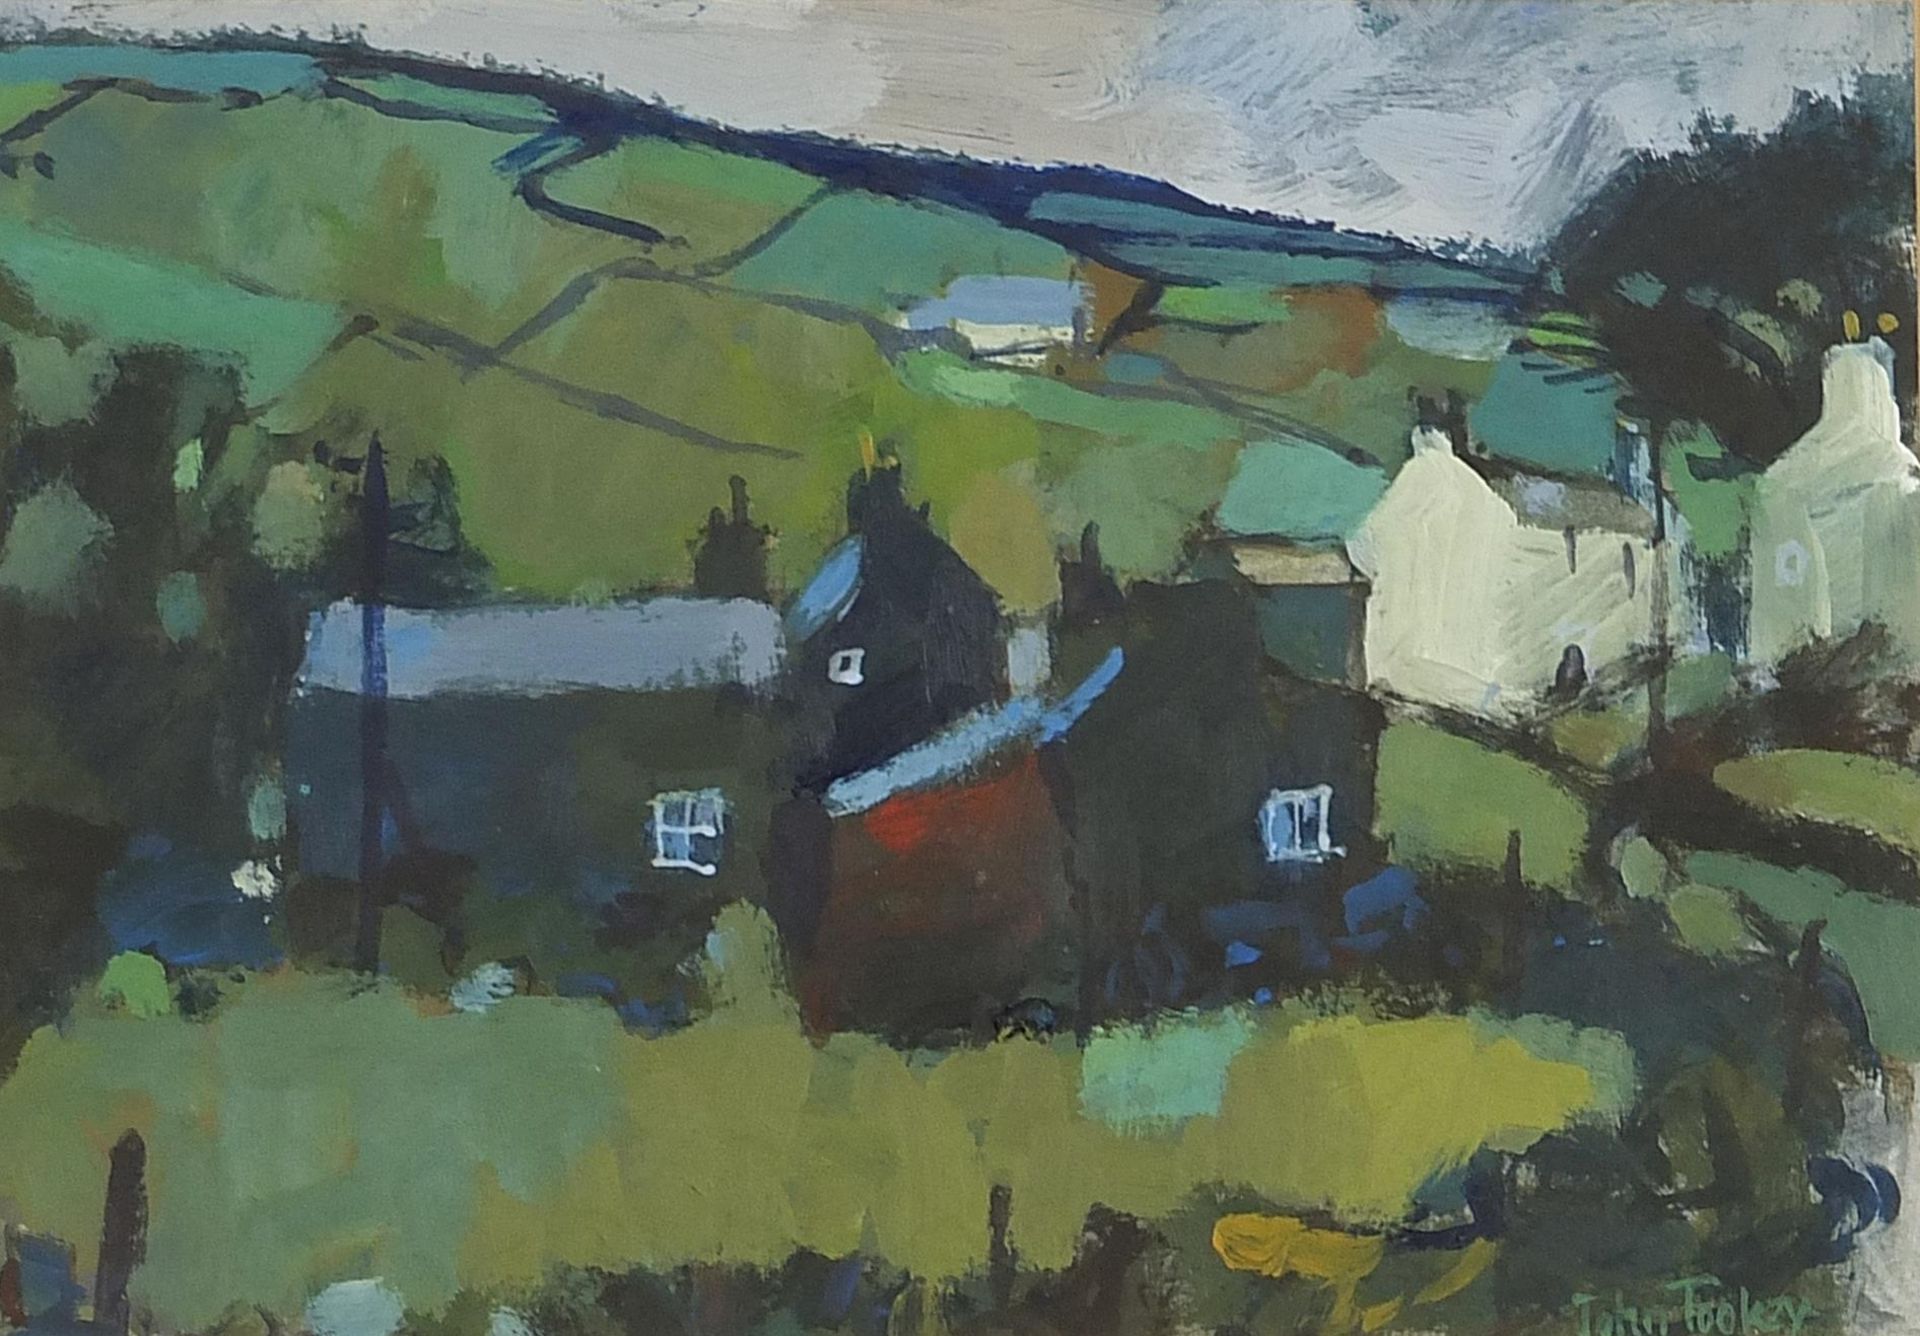 John Tookey - New Biggen, Teesdale, signed acrylic, At the Mall Galleries Exhibition label verso,